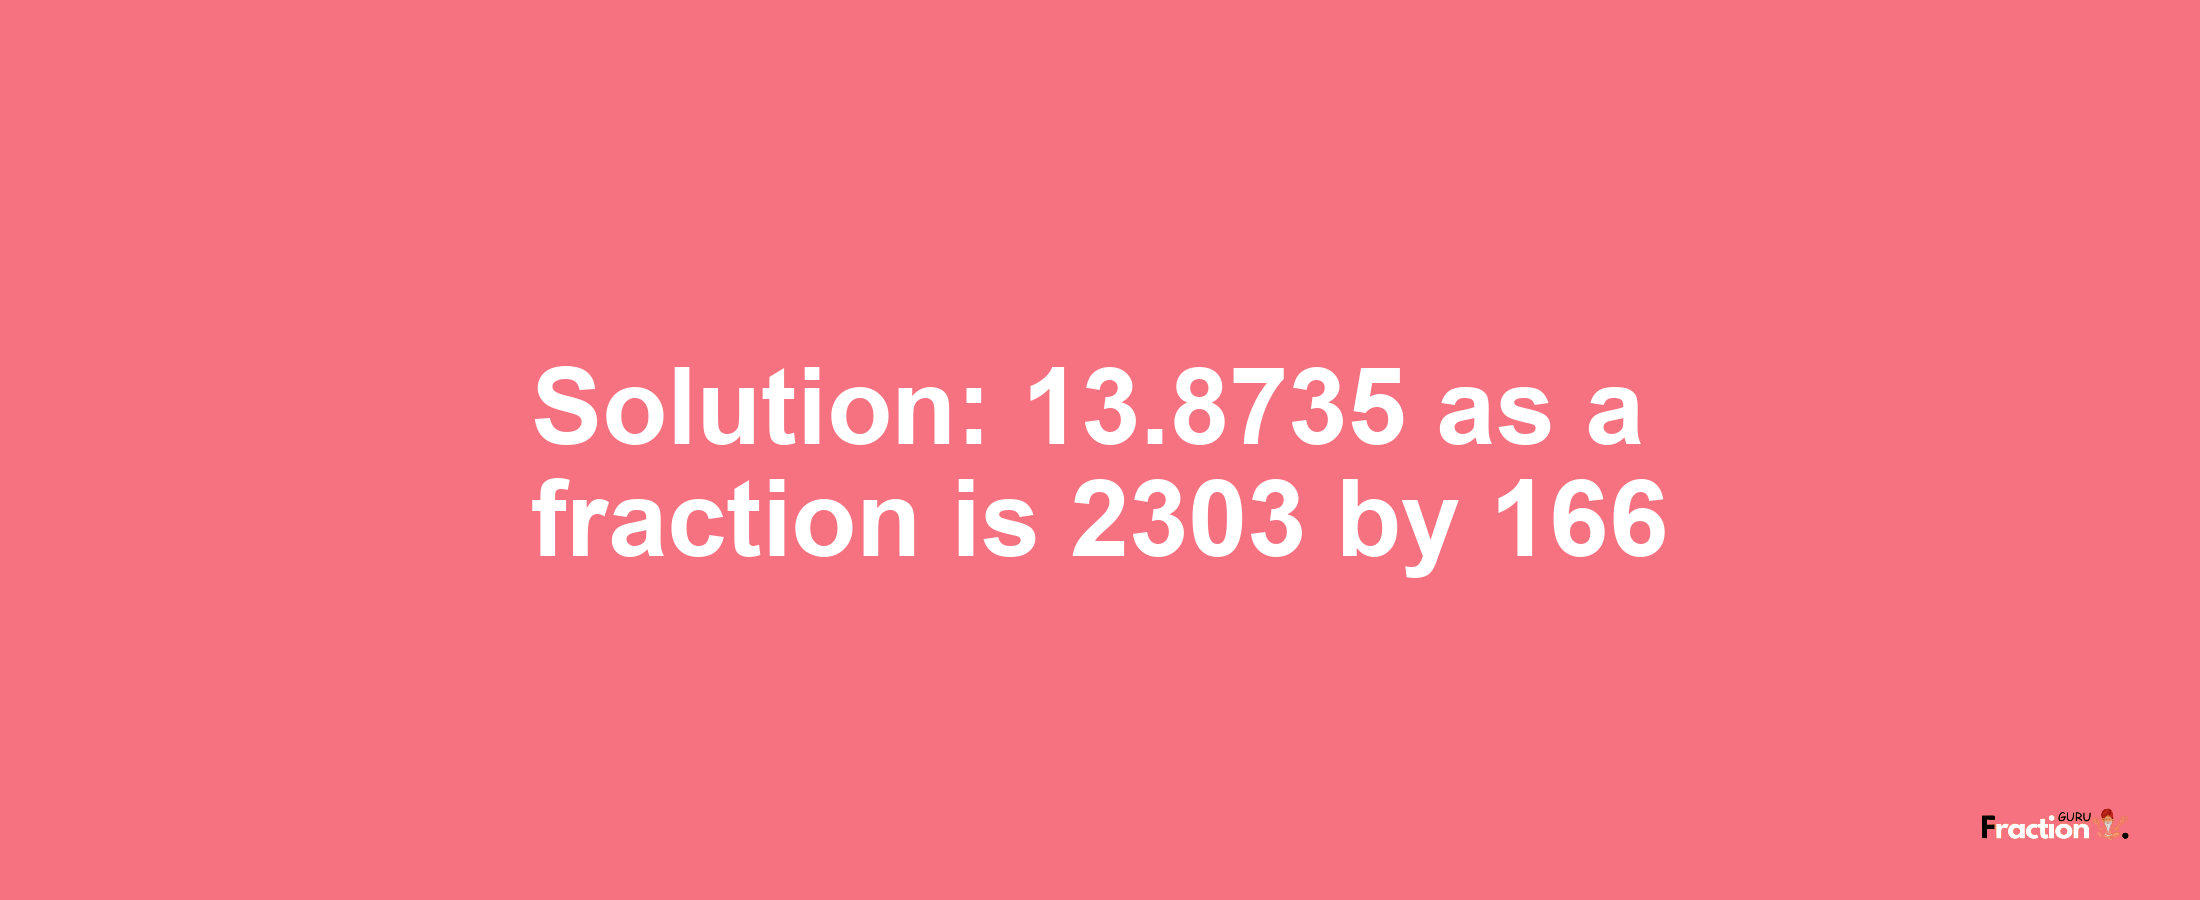 Solution:13.8735 as a fraction is 2303/166